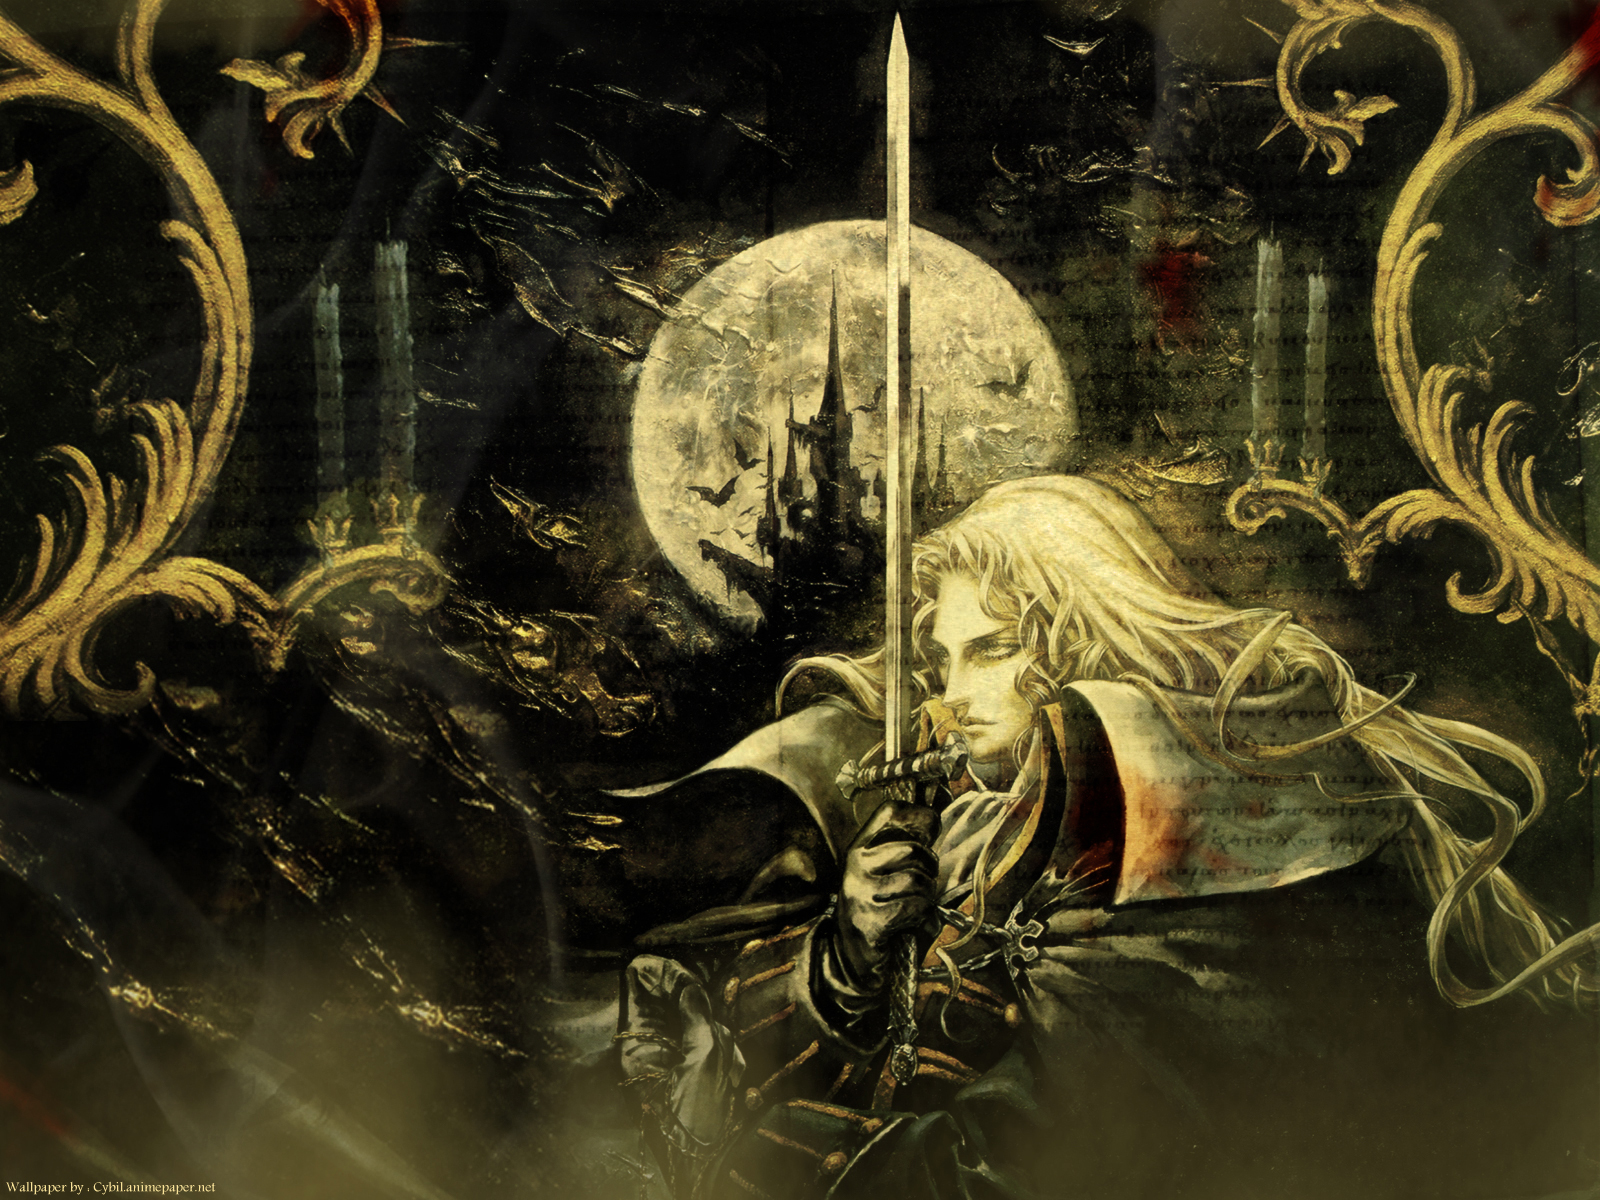 Posted in Wallpapers | Tagged bat, castle, castlevania, dark, game, medieval 